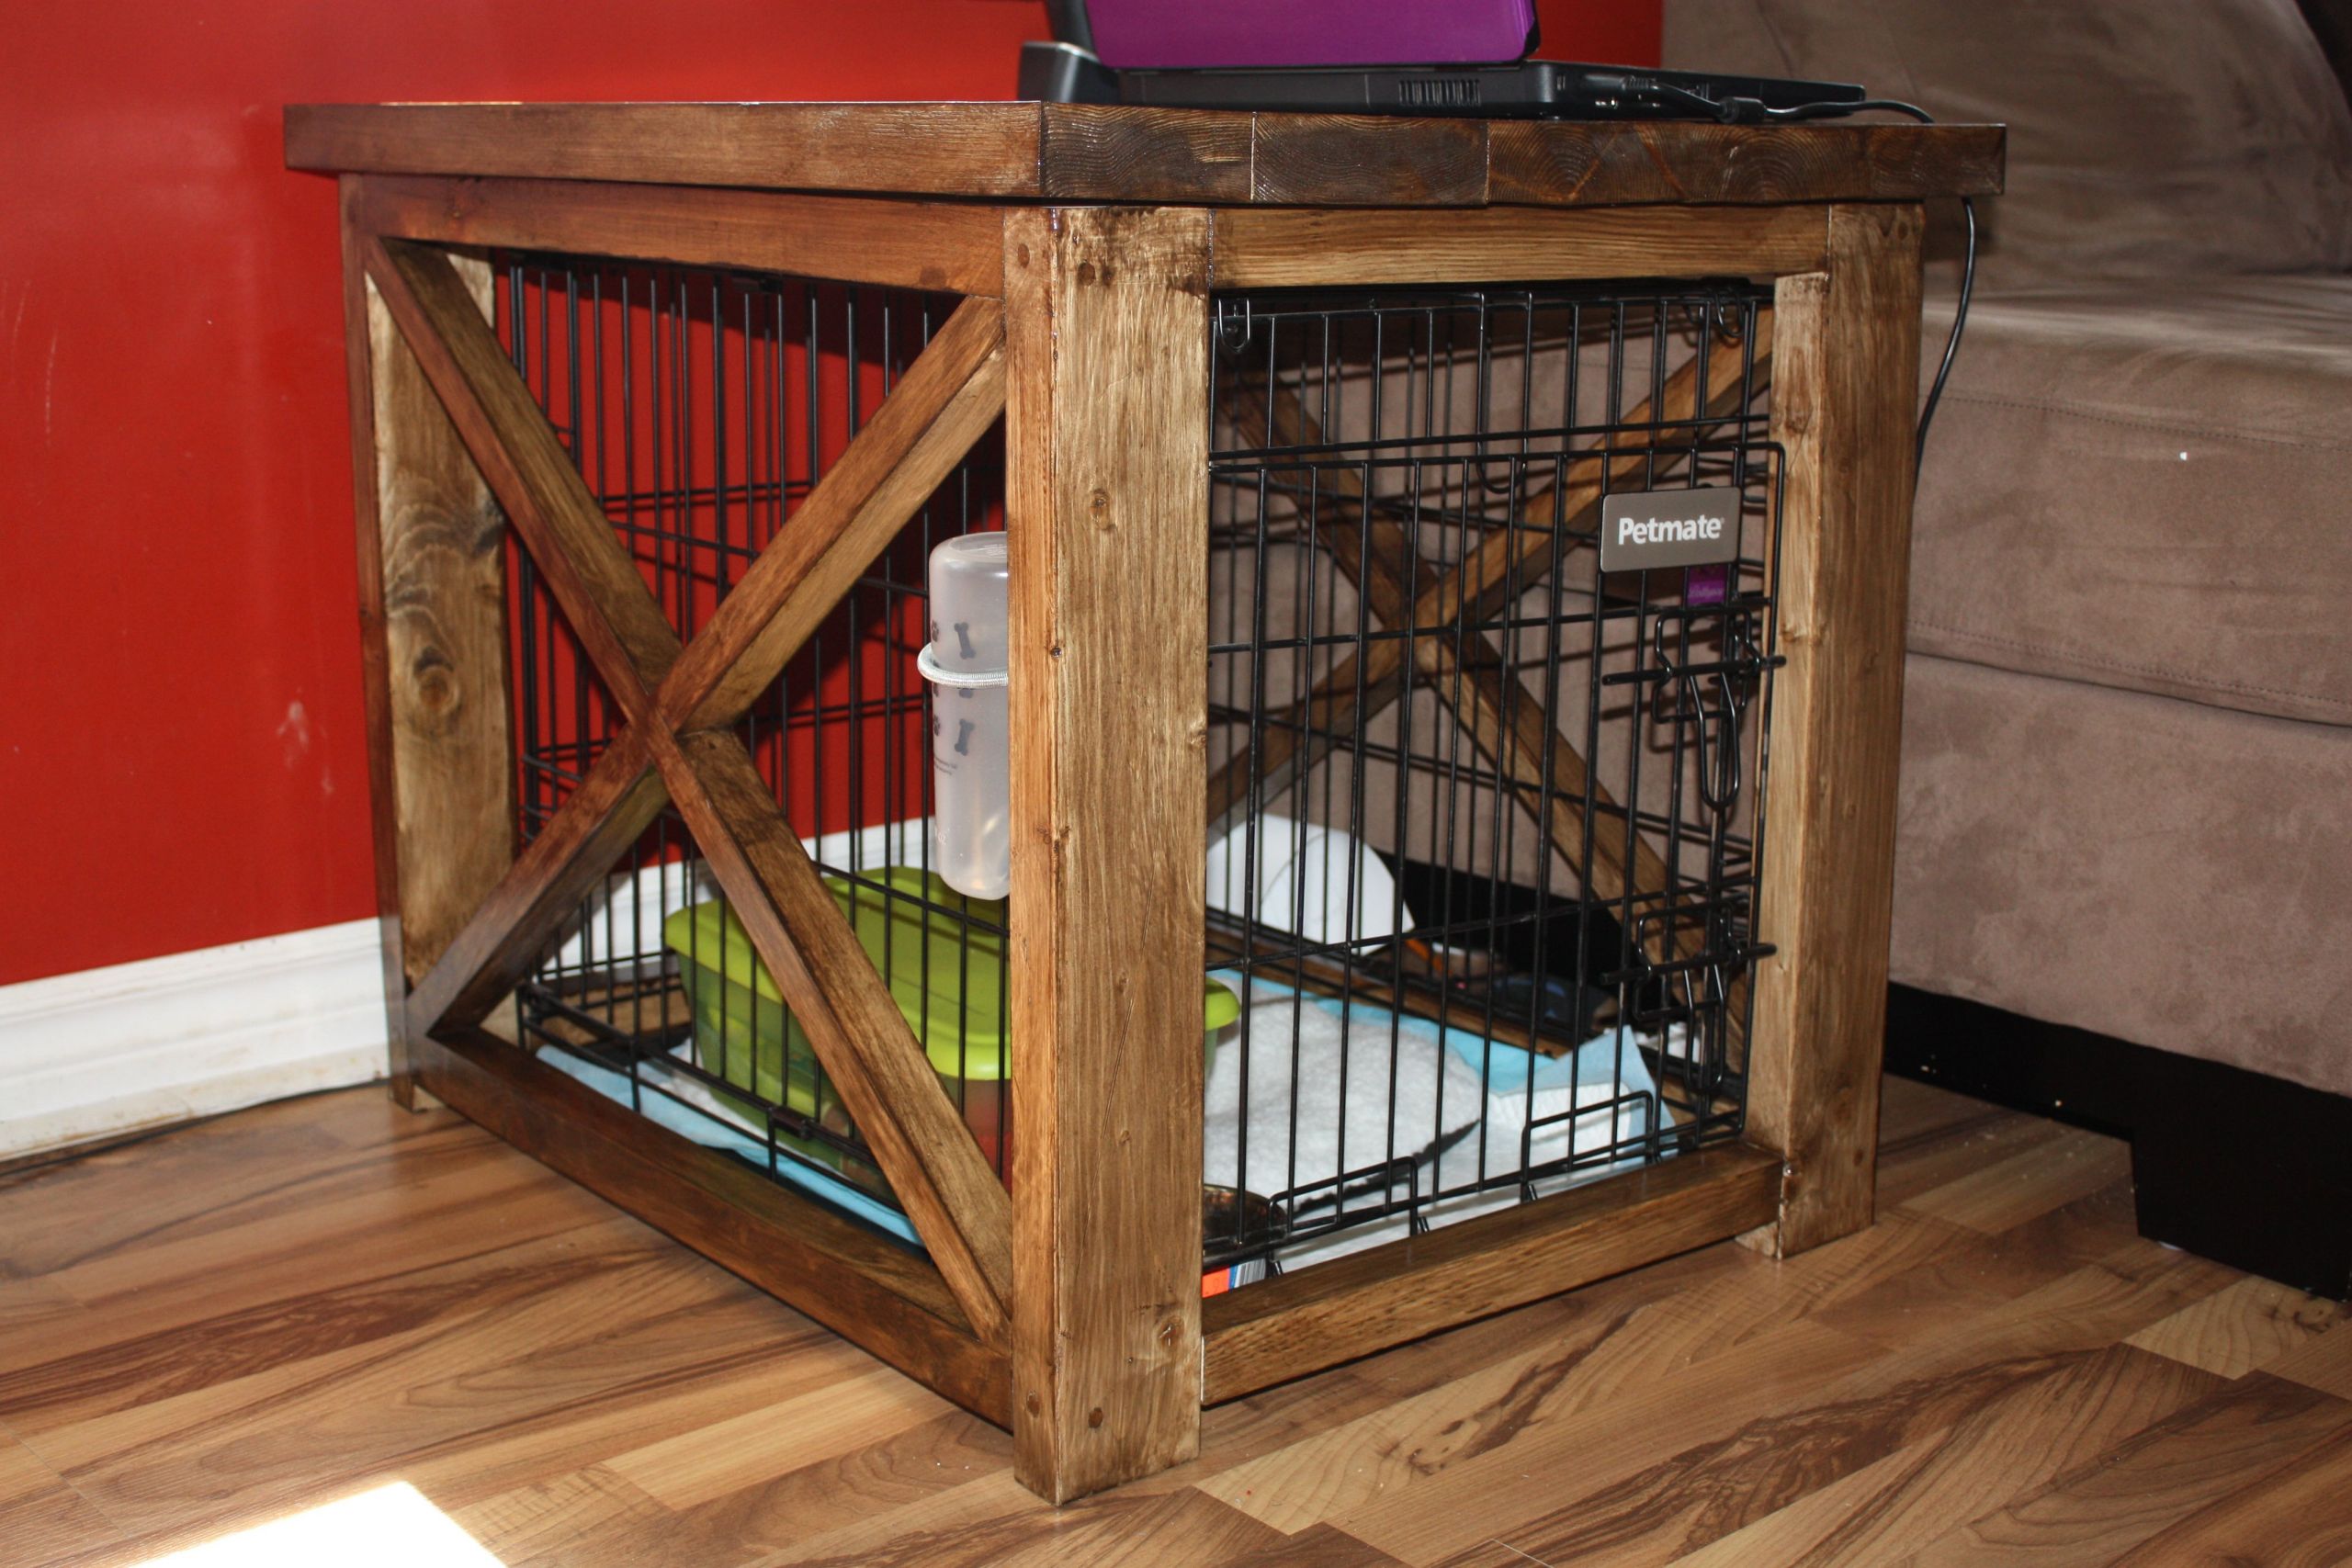 DIY Wood Dog Crate Cover
 diy dog crate covers